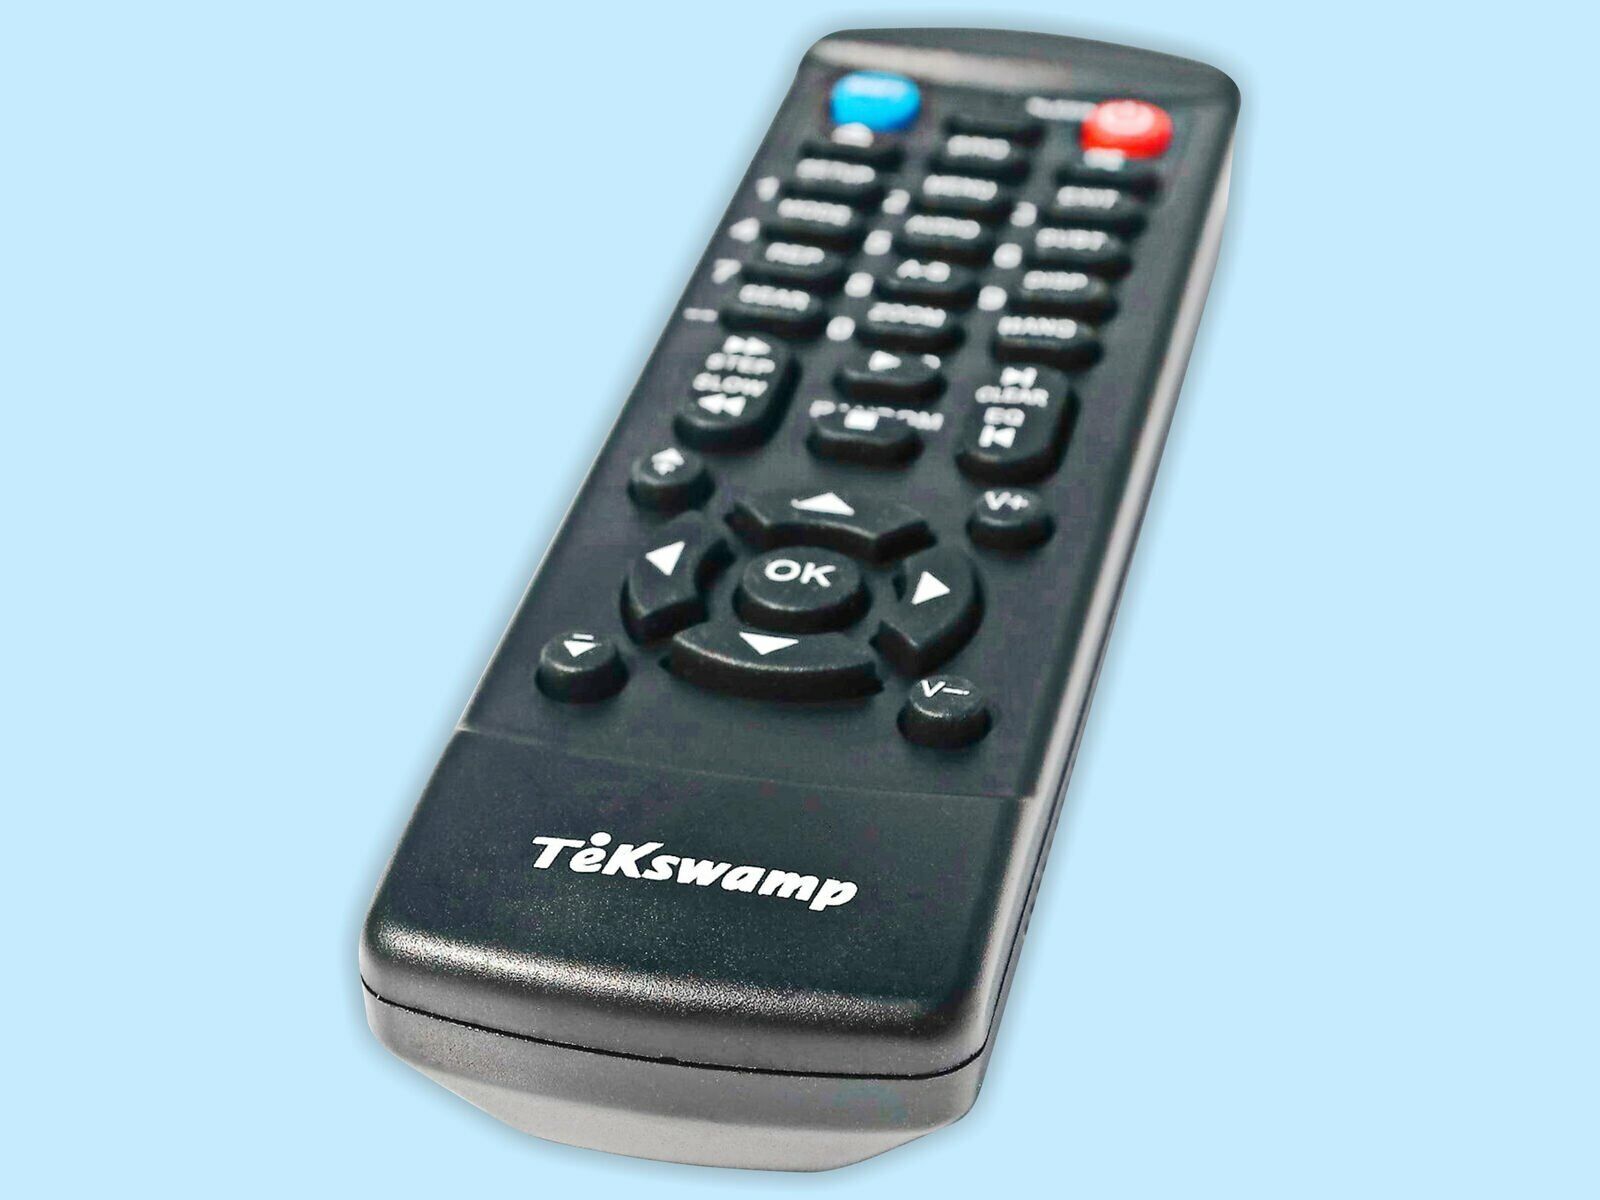 TeKswamp Remote Control for LG BH7130C BH7130CB BB5530A BH9220BW BH9540TW - image 2 of 7